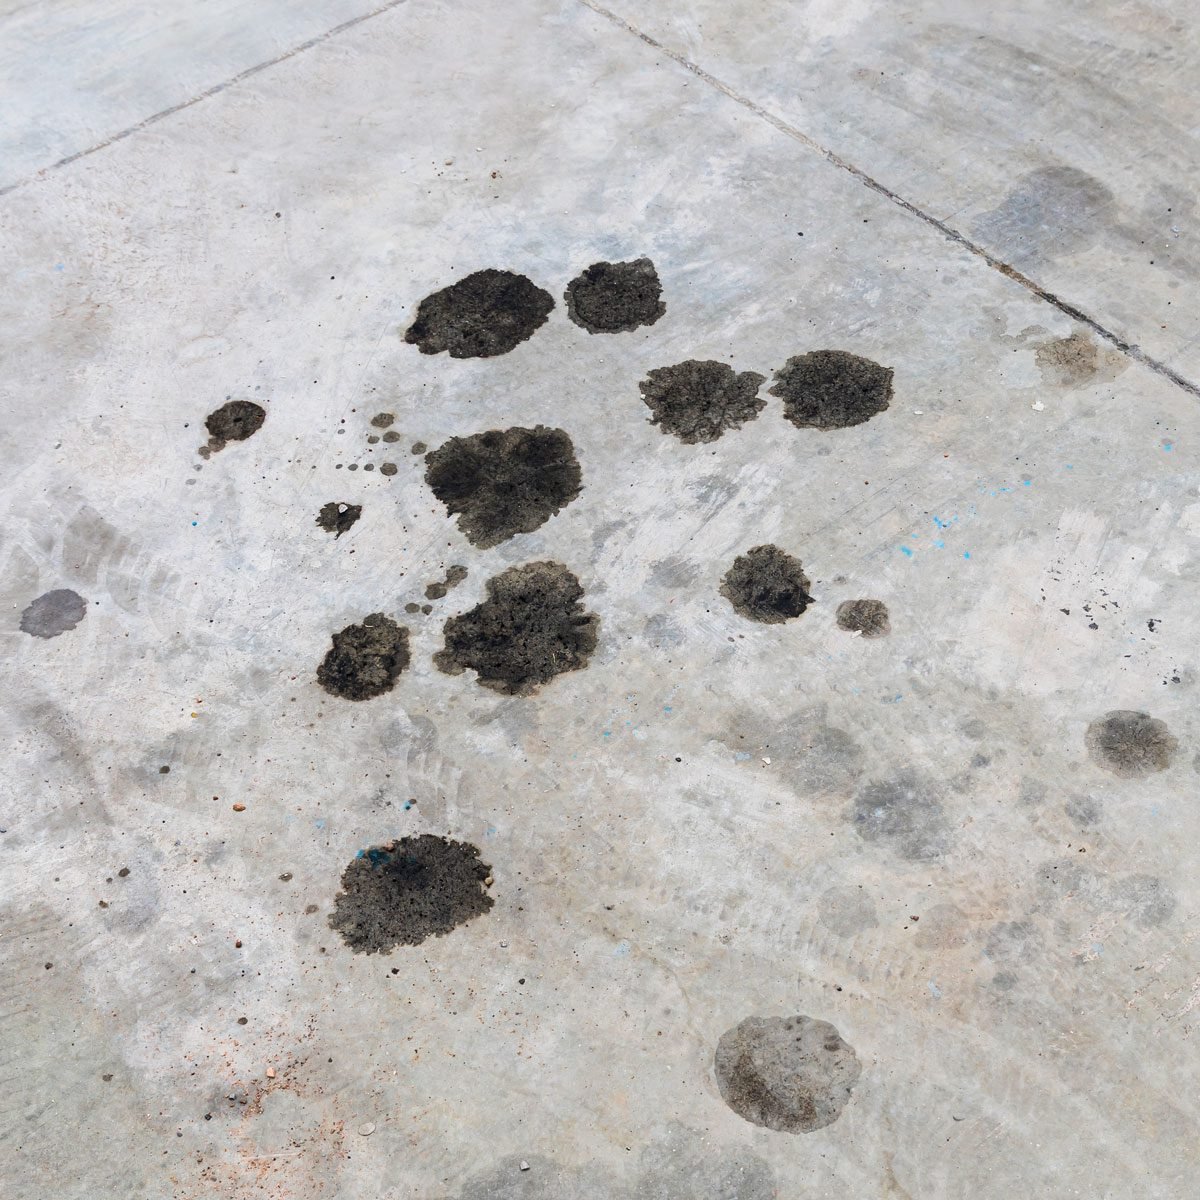 Engine Oil Leakage On Concrete Floor. Black Engine Oil On Concrete Floor. Engine Oil Leak From The Engine.  Surface Concrete With The Motor Oils Stain Grey Black Silver.